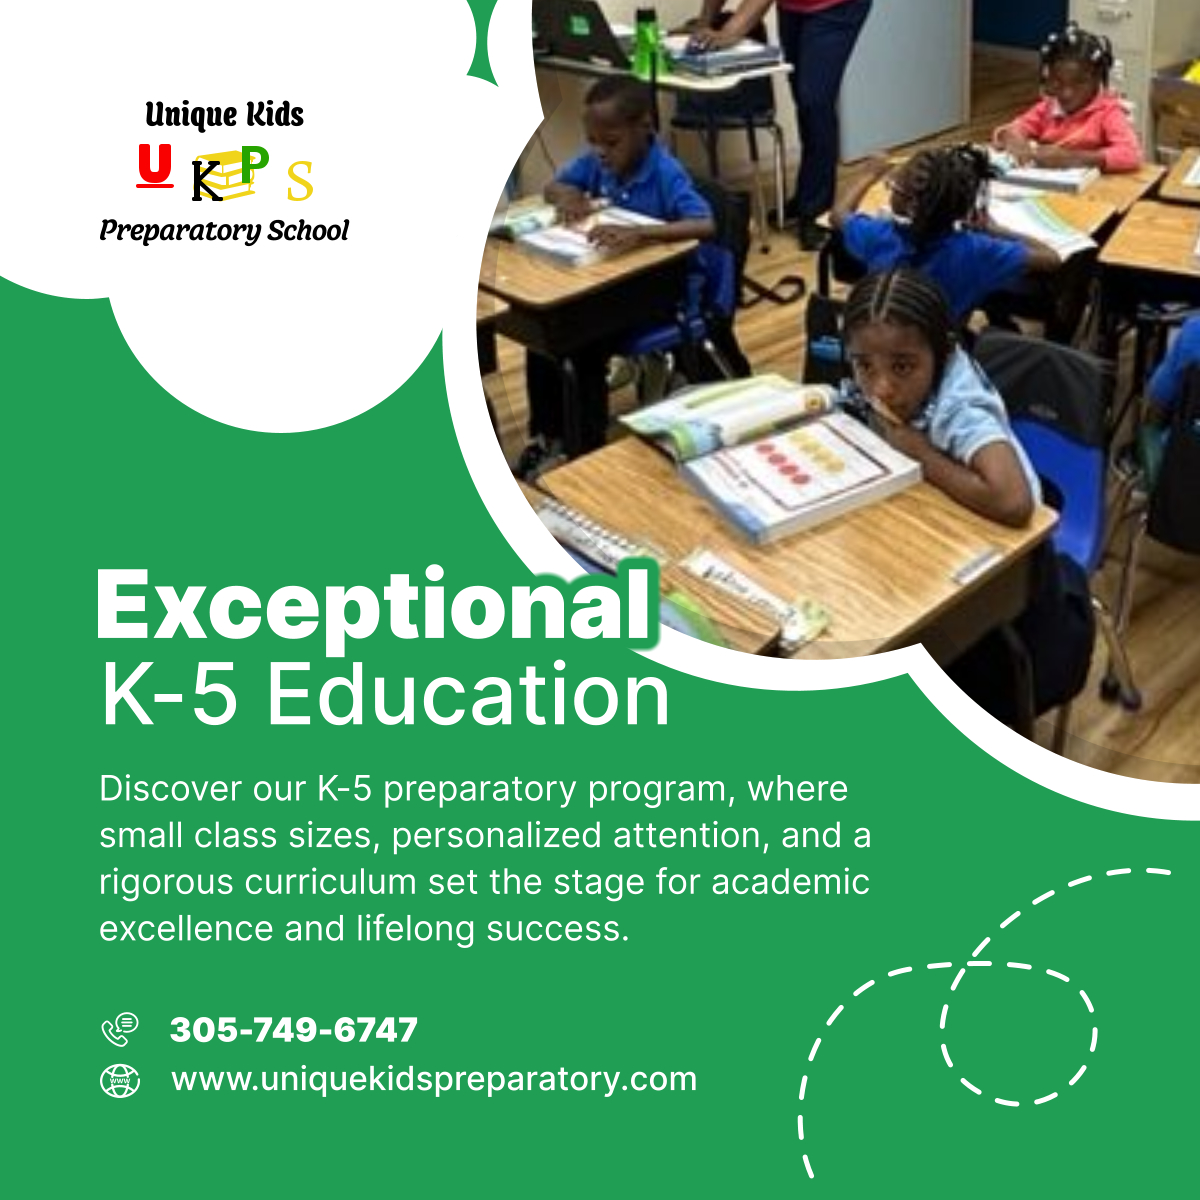 We're committed to nurturing young minds and laying the foundation for academic achievement. Join us in providing your child with a top-tier education experience! 

#K5PreparatoryProgram #PreparatorySchool #MiamiFL